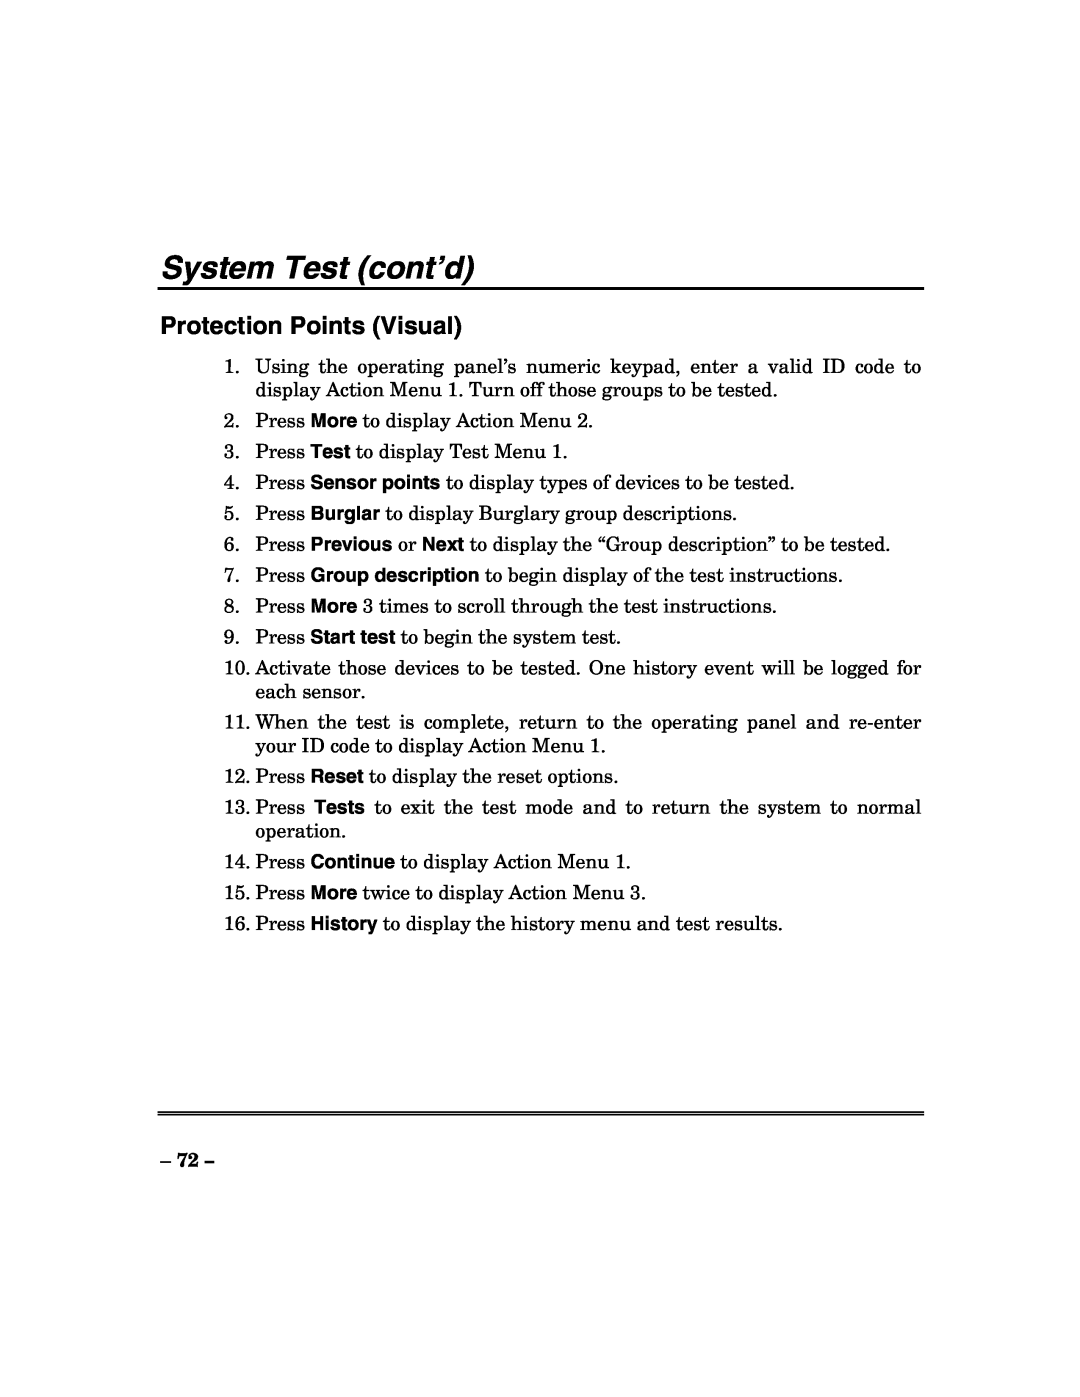 ADT Security Services 200 Plus manual System Test cont’d, Protection Points Visual 